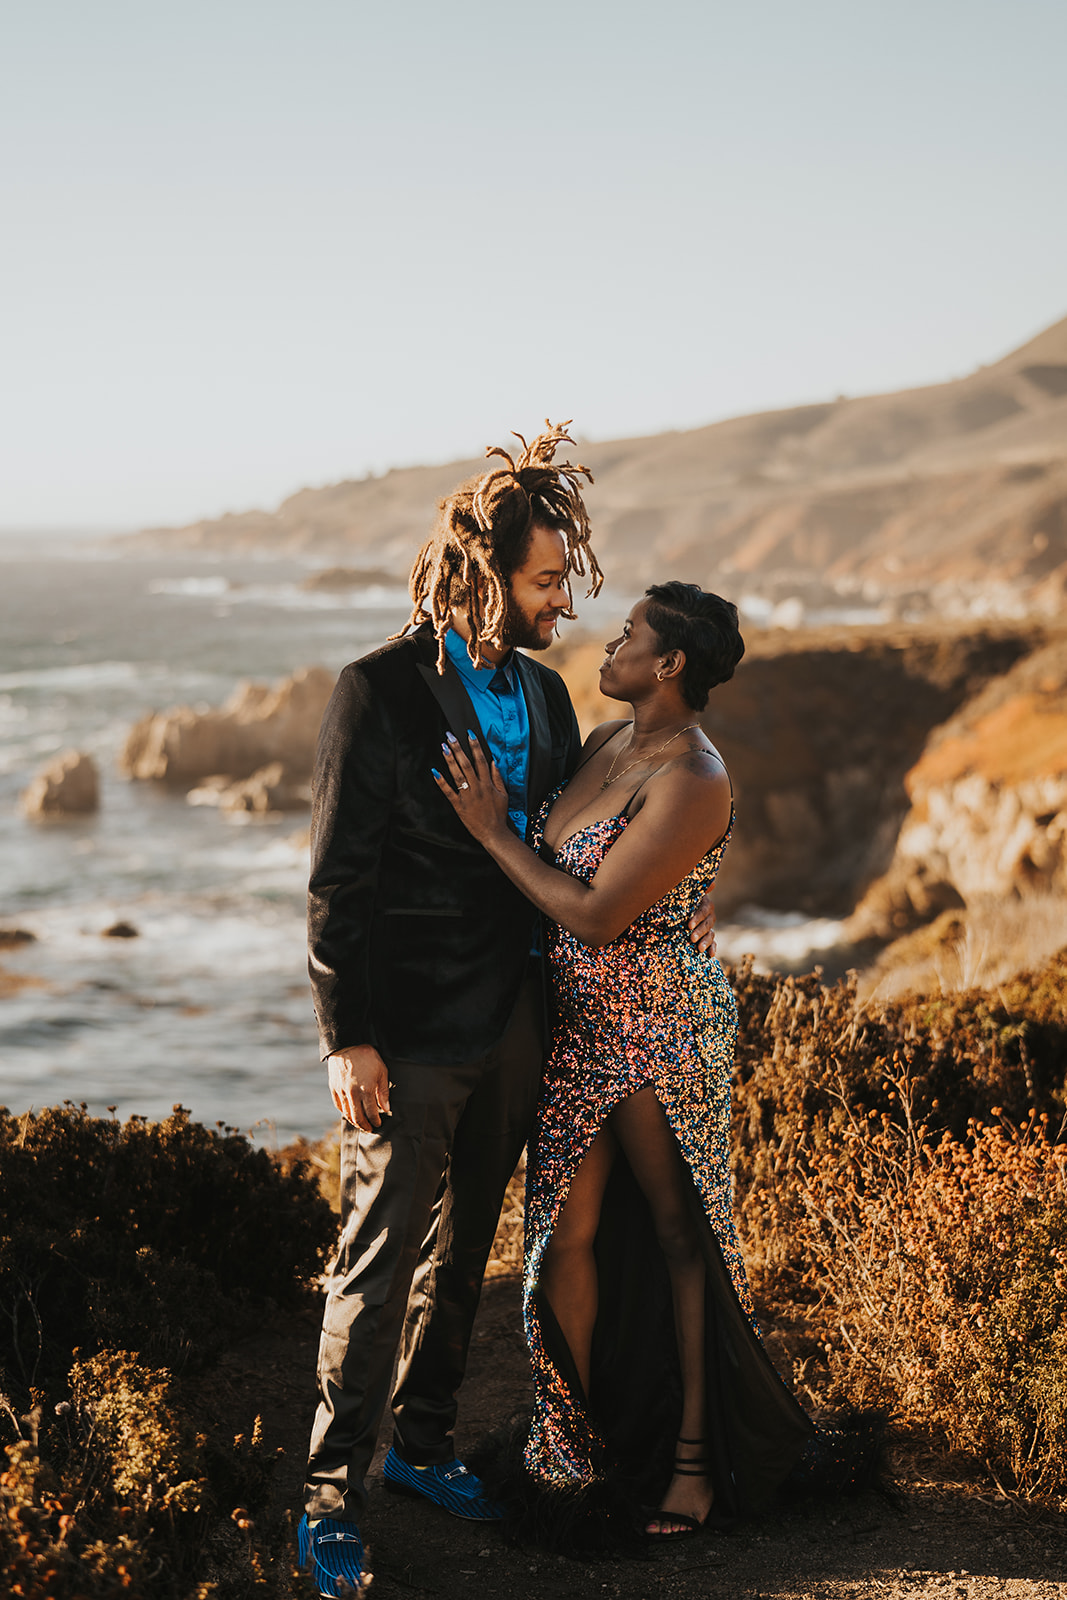 Posed couple stands beautifully against Big Sur coastline